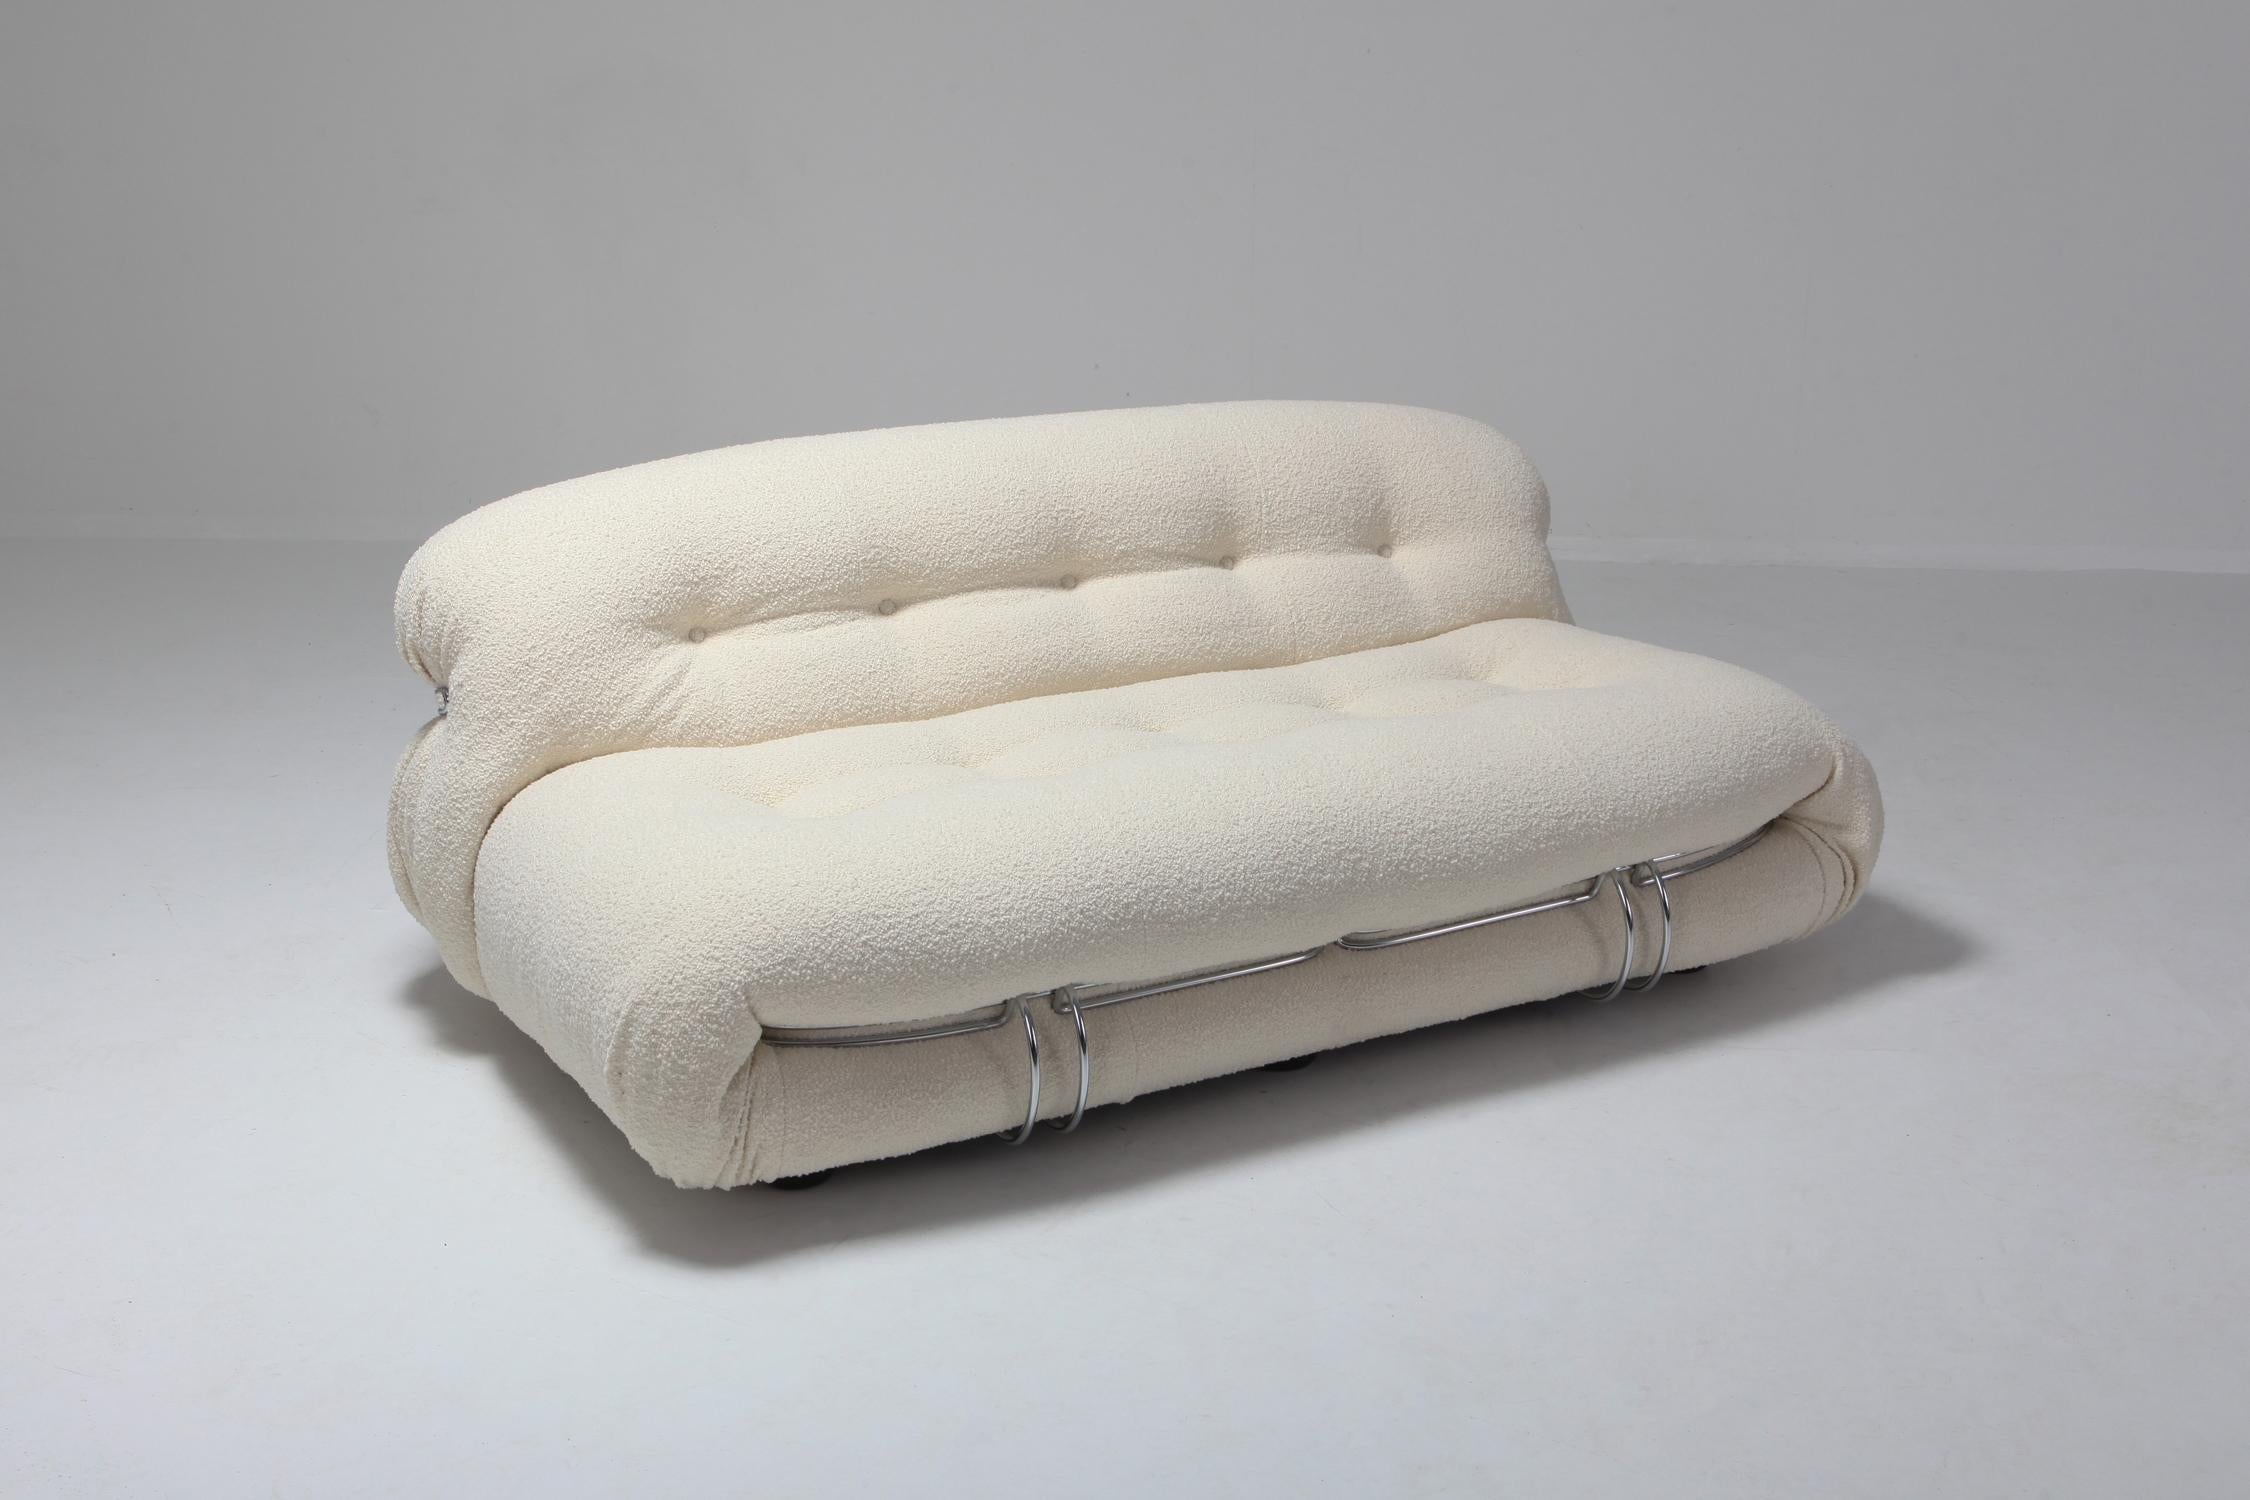 For Darren only
reupholstered in ivory bouclé wool.
Manufactured by Cassina in the 1970s, the Soriana collection was meant to express beauty and comfort by using a whole bundle of fabric held by a chrome-plated steel clamp.
The 